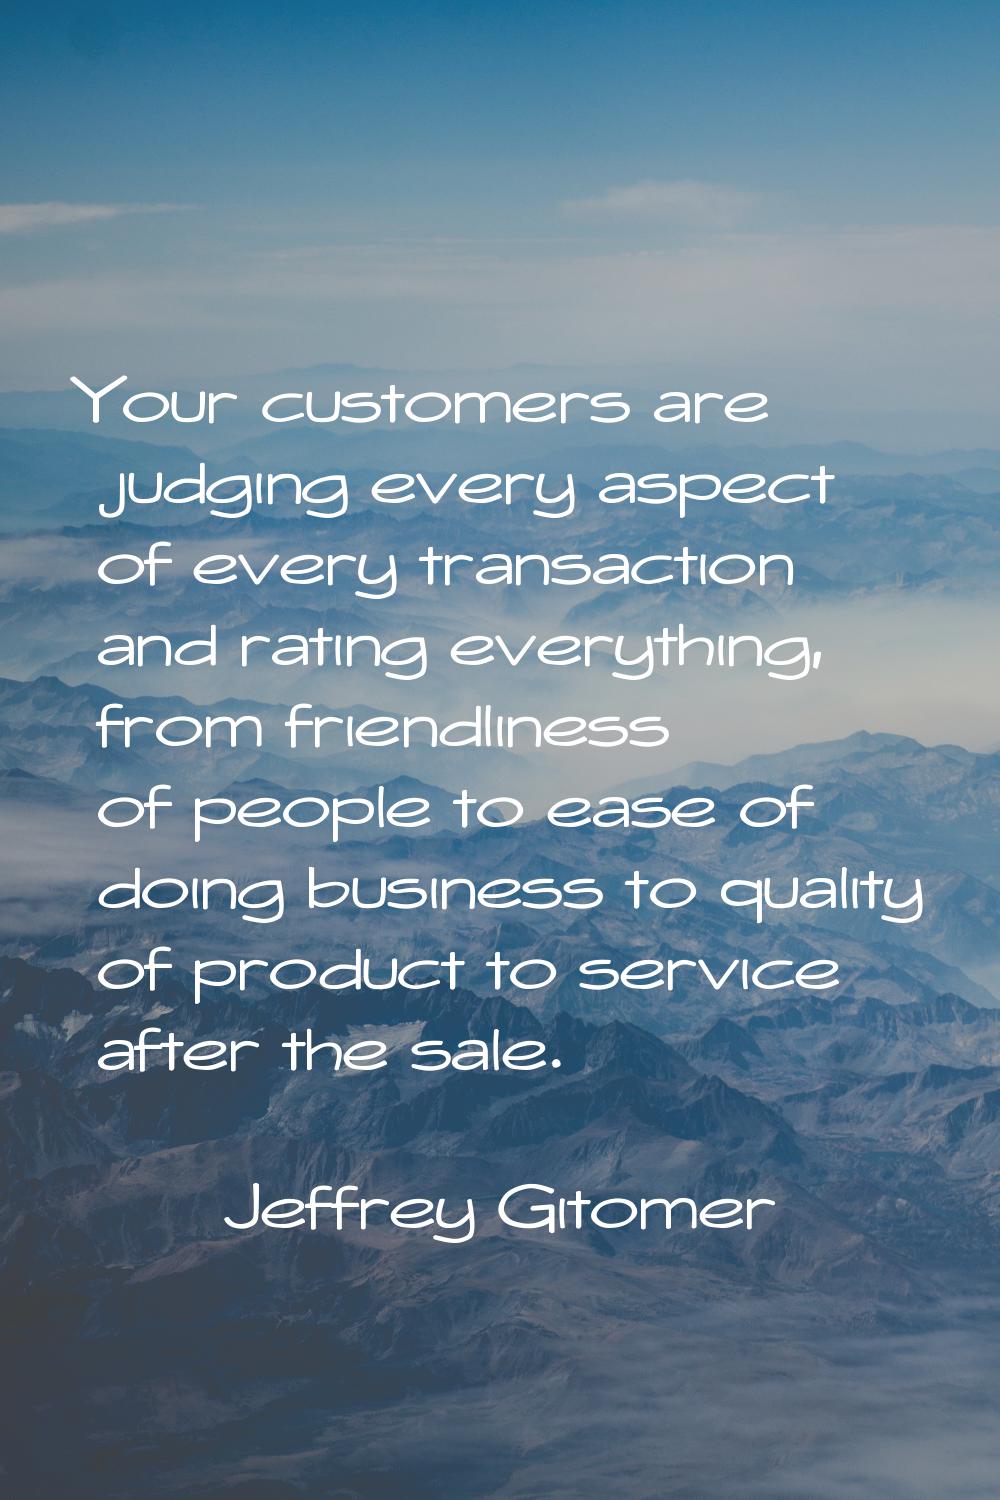 Your customers are judging every aspect of every transaction and rating everything, from friendline